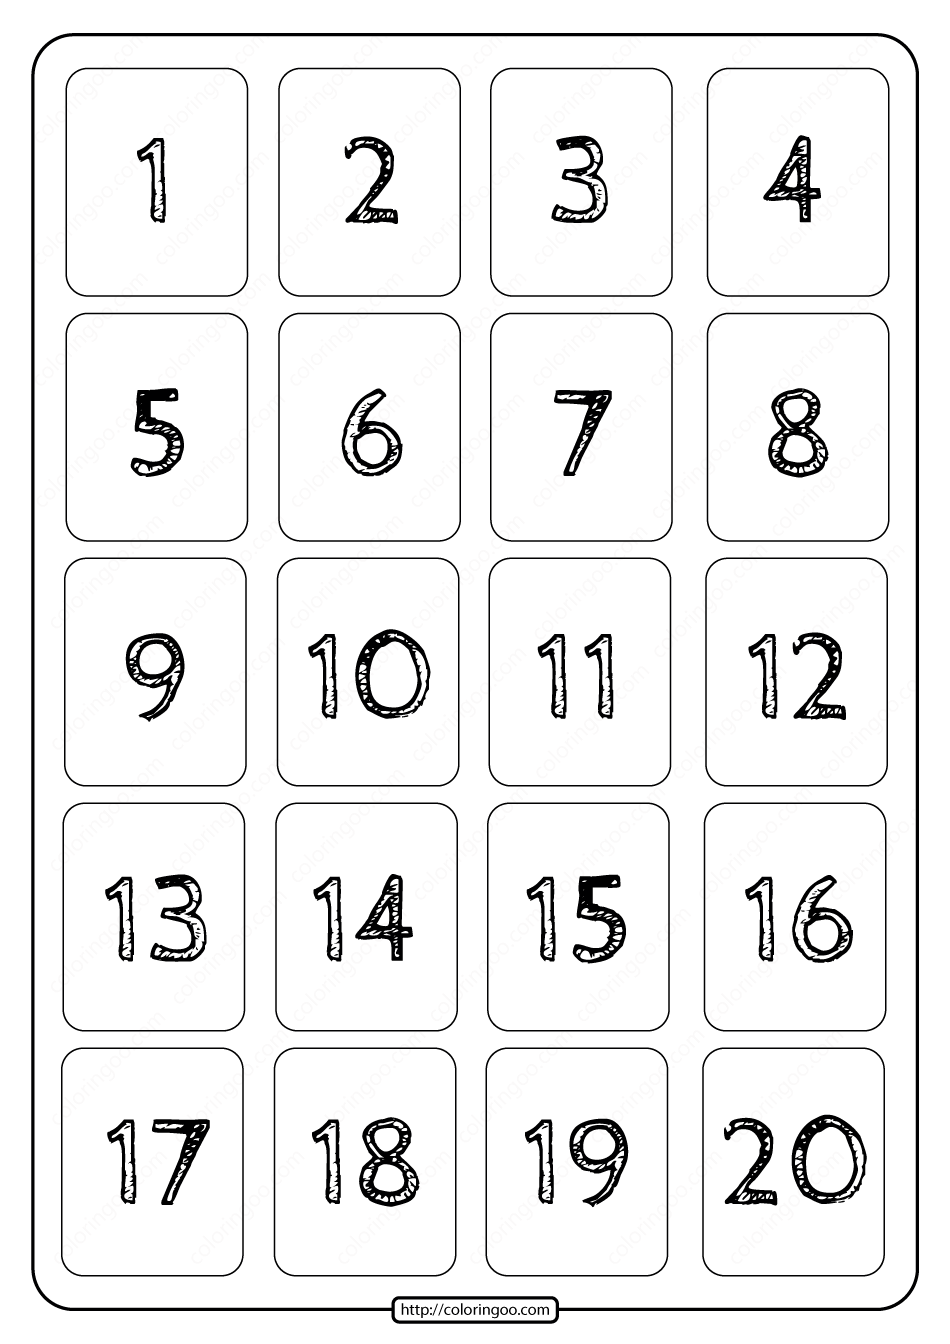 printable-1-to-20-rectangle-border-numbers-worksheet-18